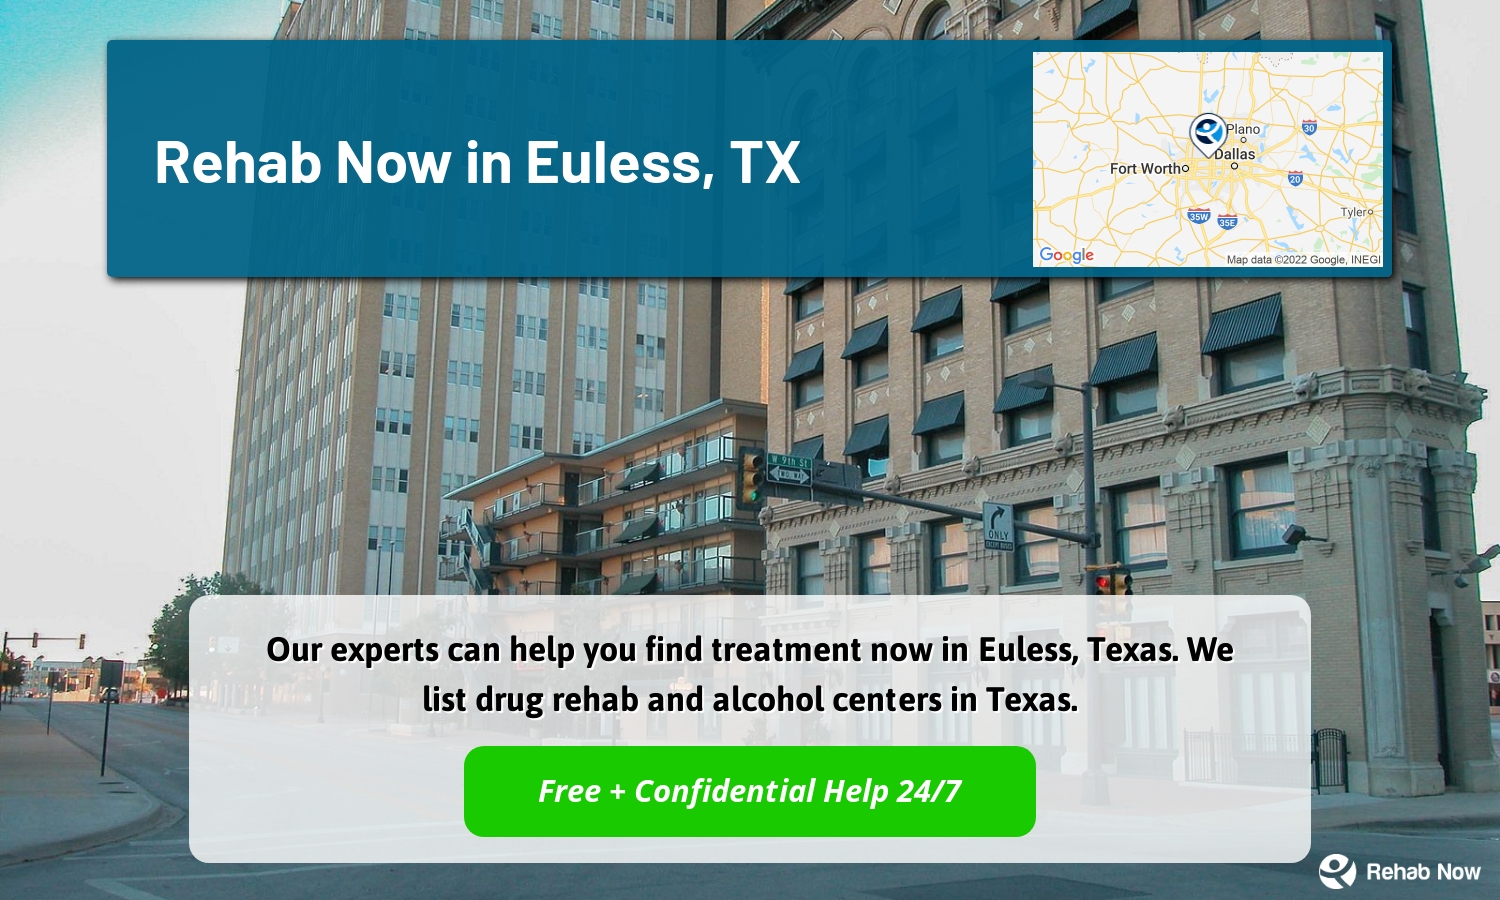 Our experts can help you find treatment now in Euless, Texas. We list drug rehab and alcohol centers in Texas.